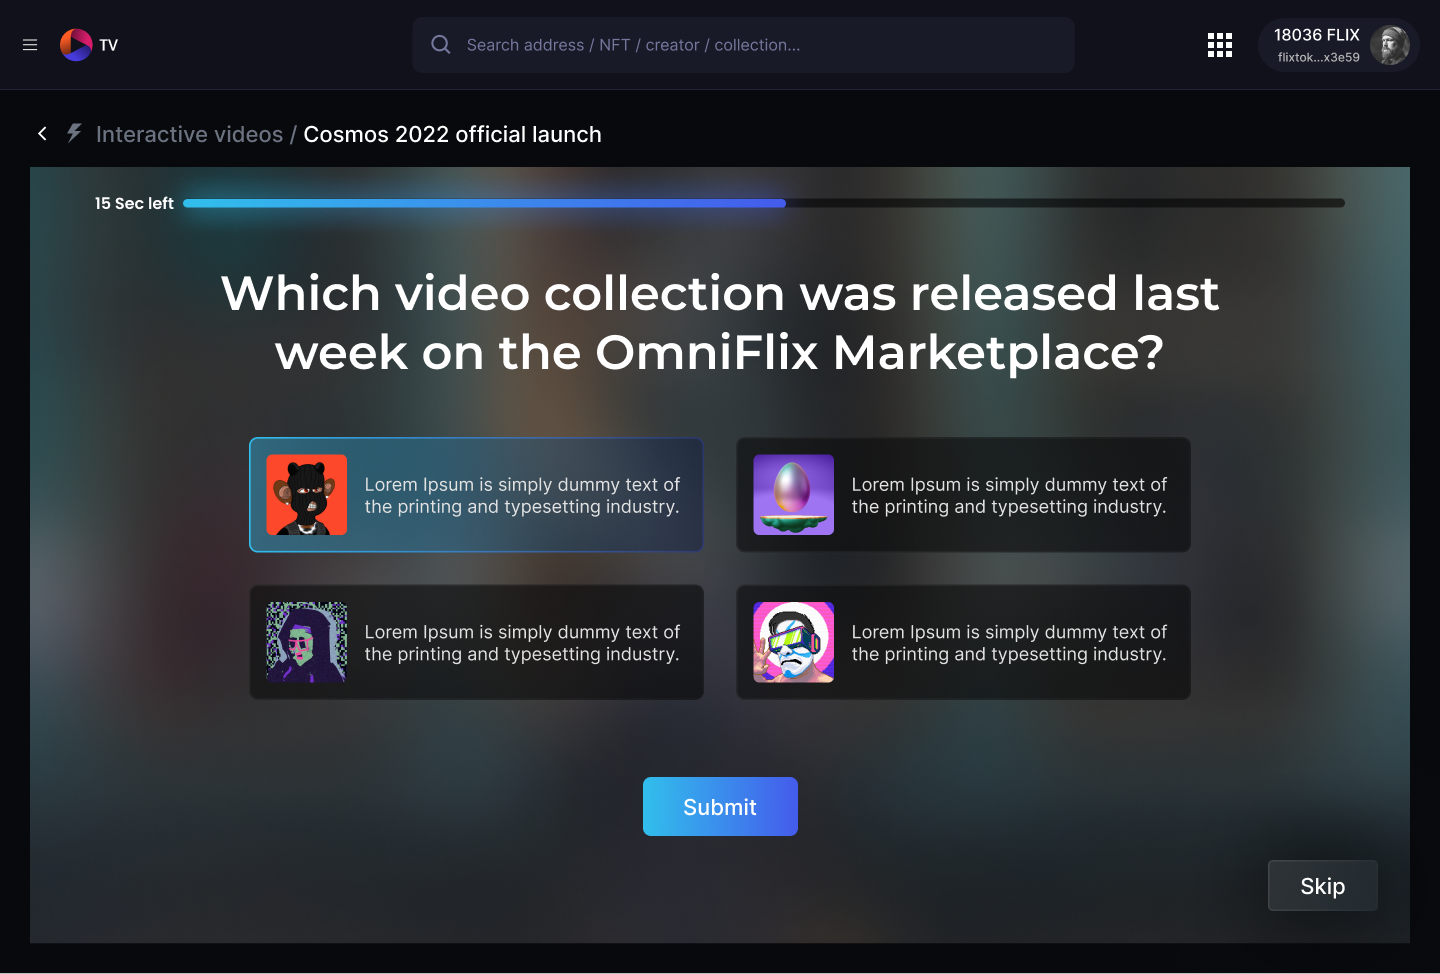 OmniFlix TV (v1) sneak peek - Interaction with Images and long text